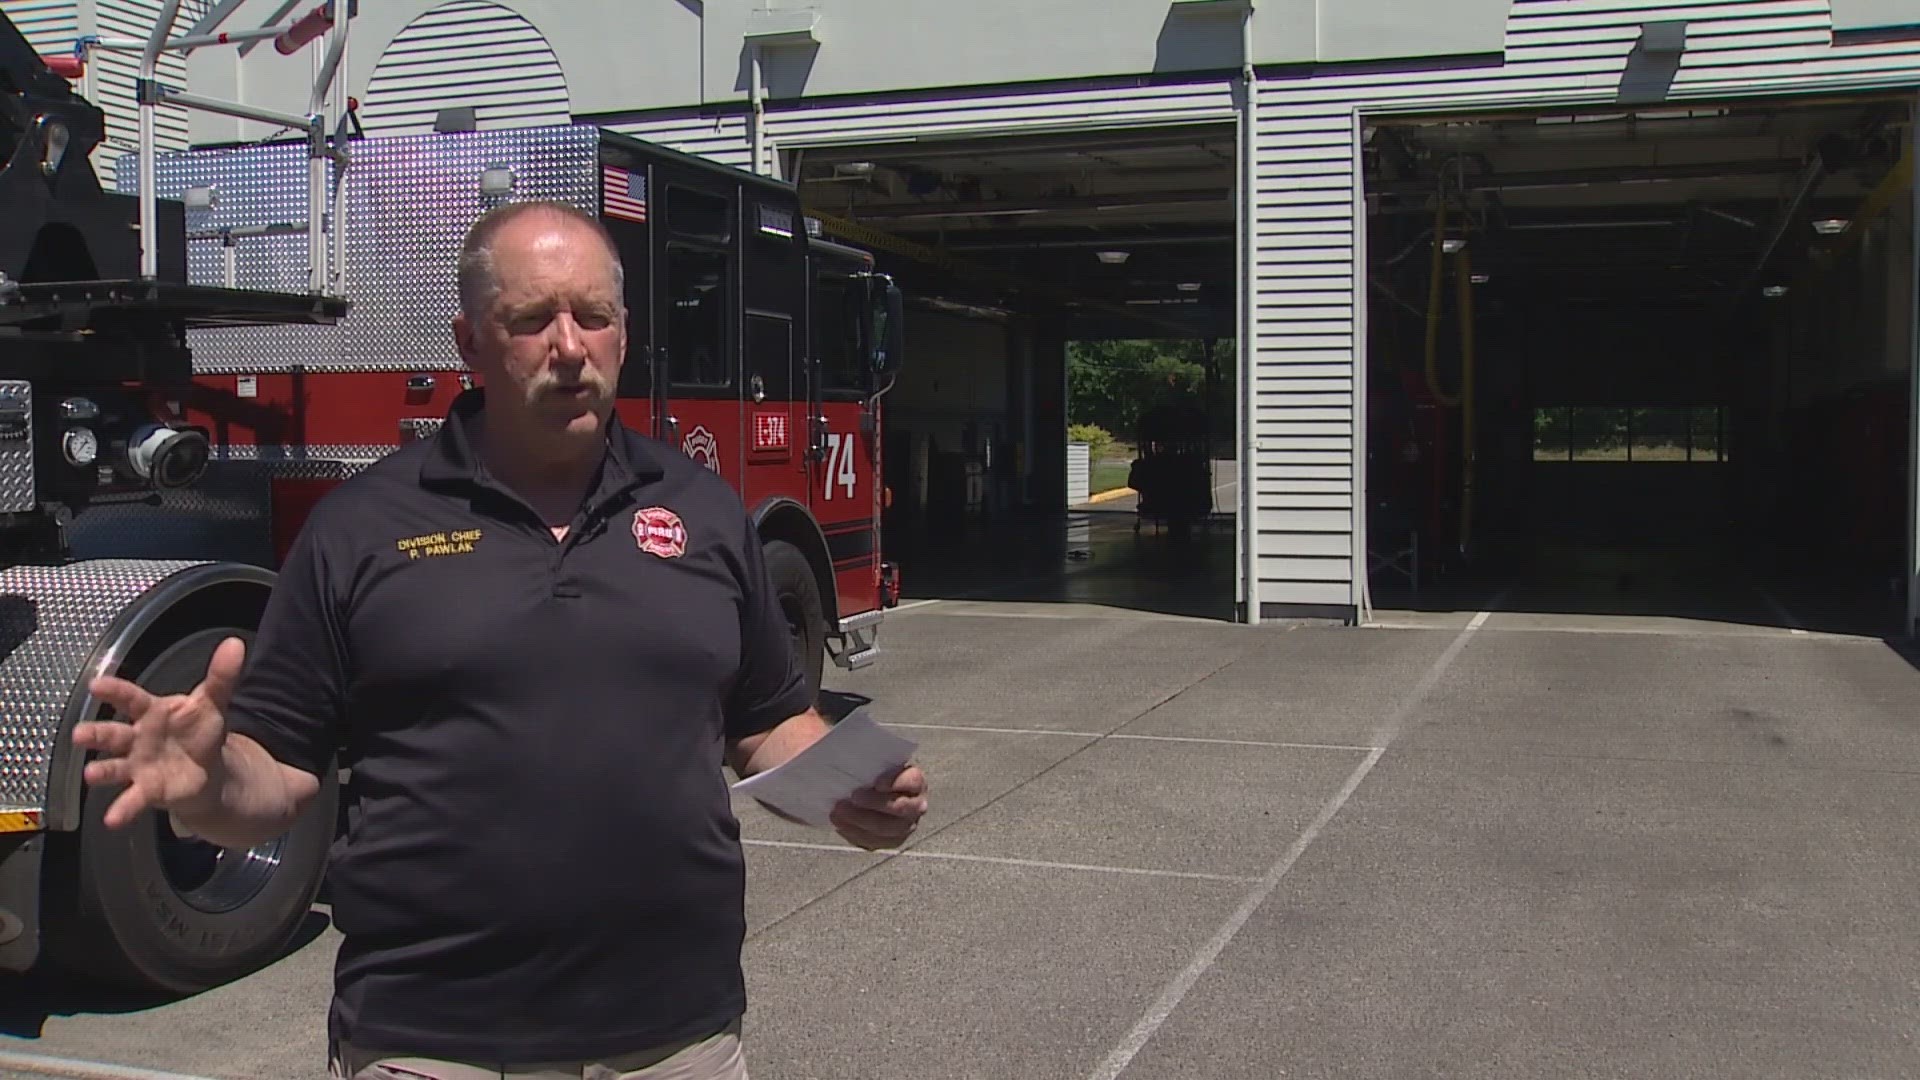 Puget Sound Fire is offering tips so Fourth of July parties don't turn into tragedies.